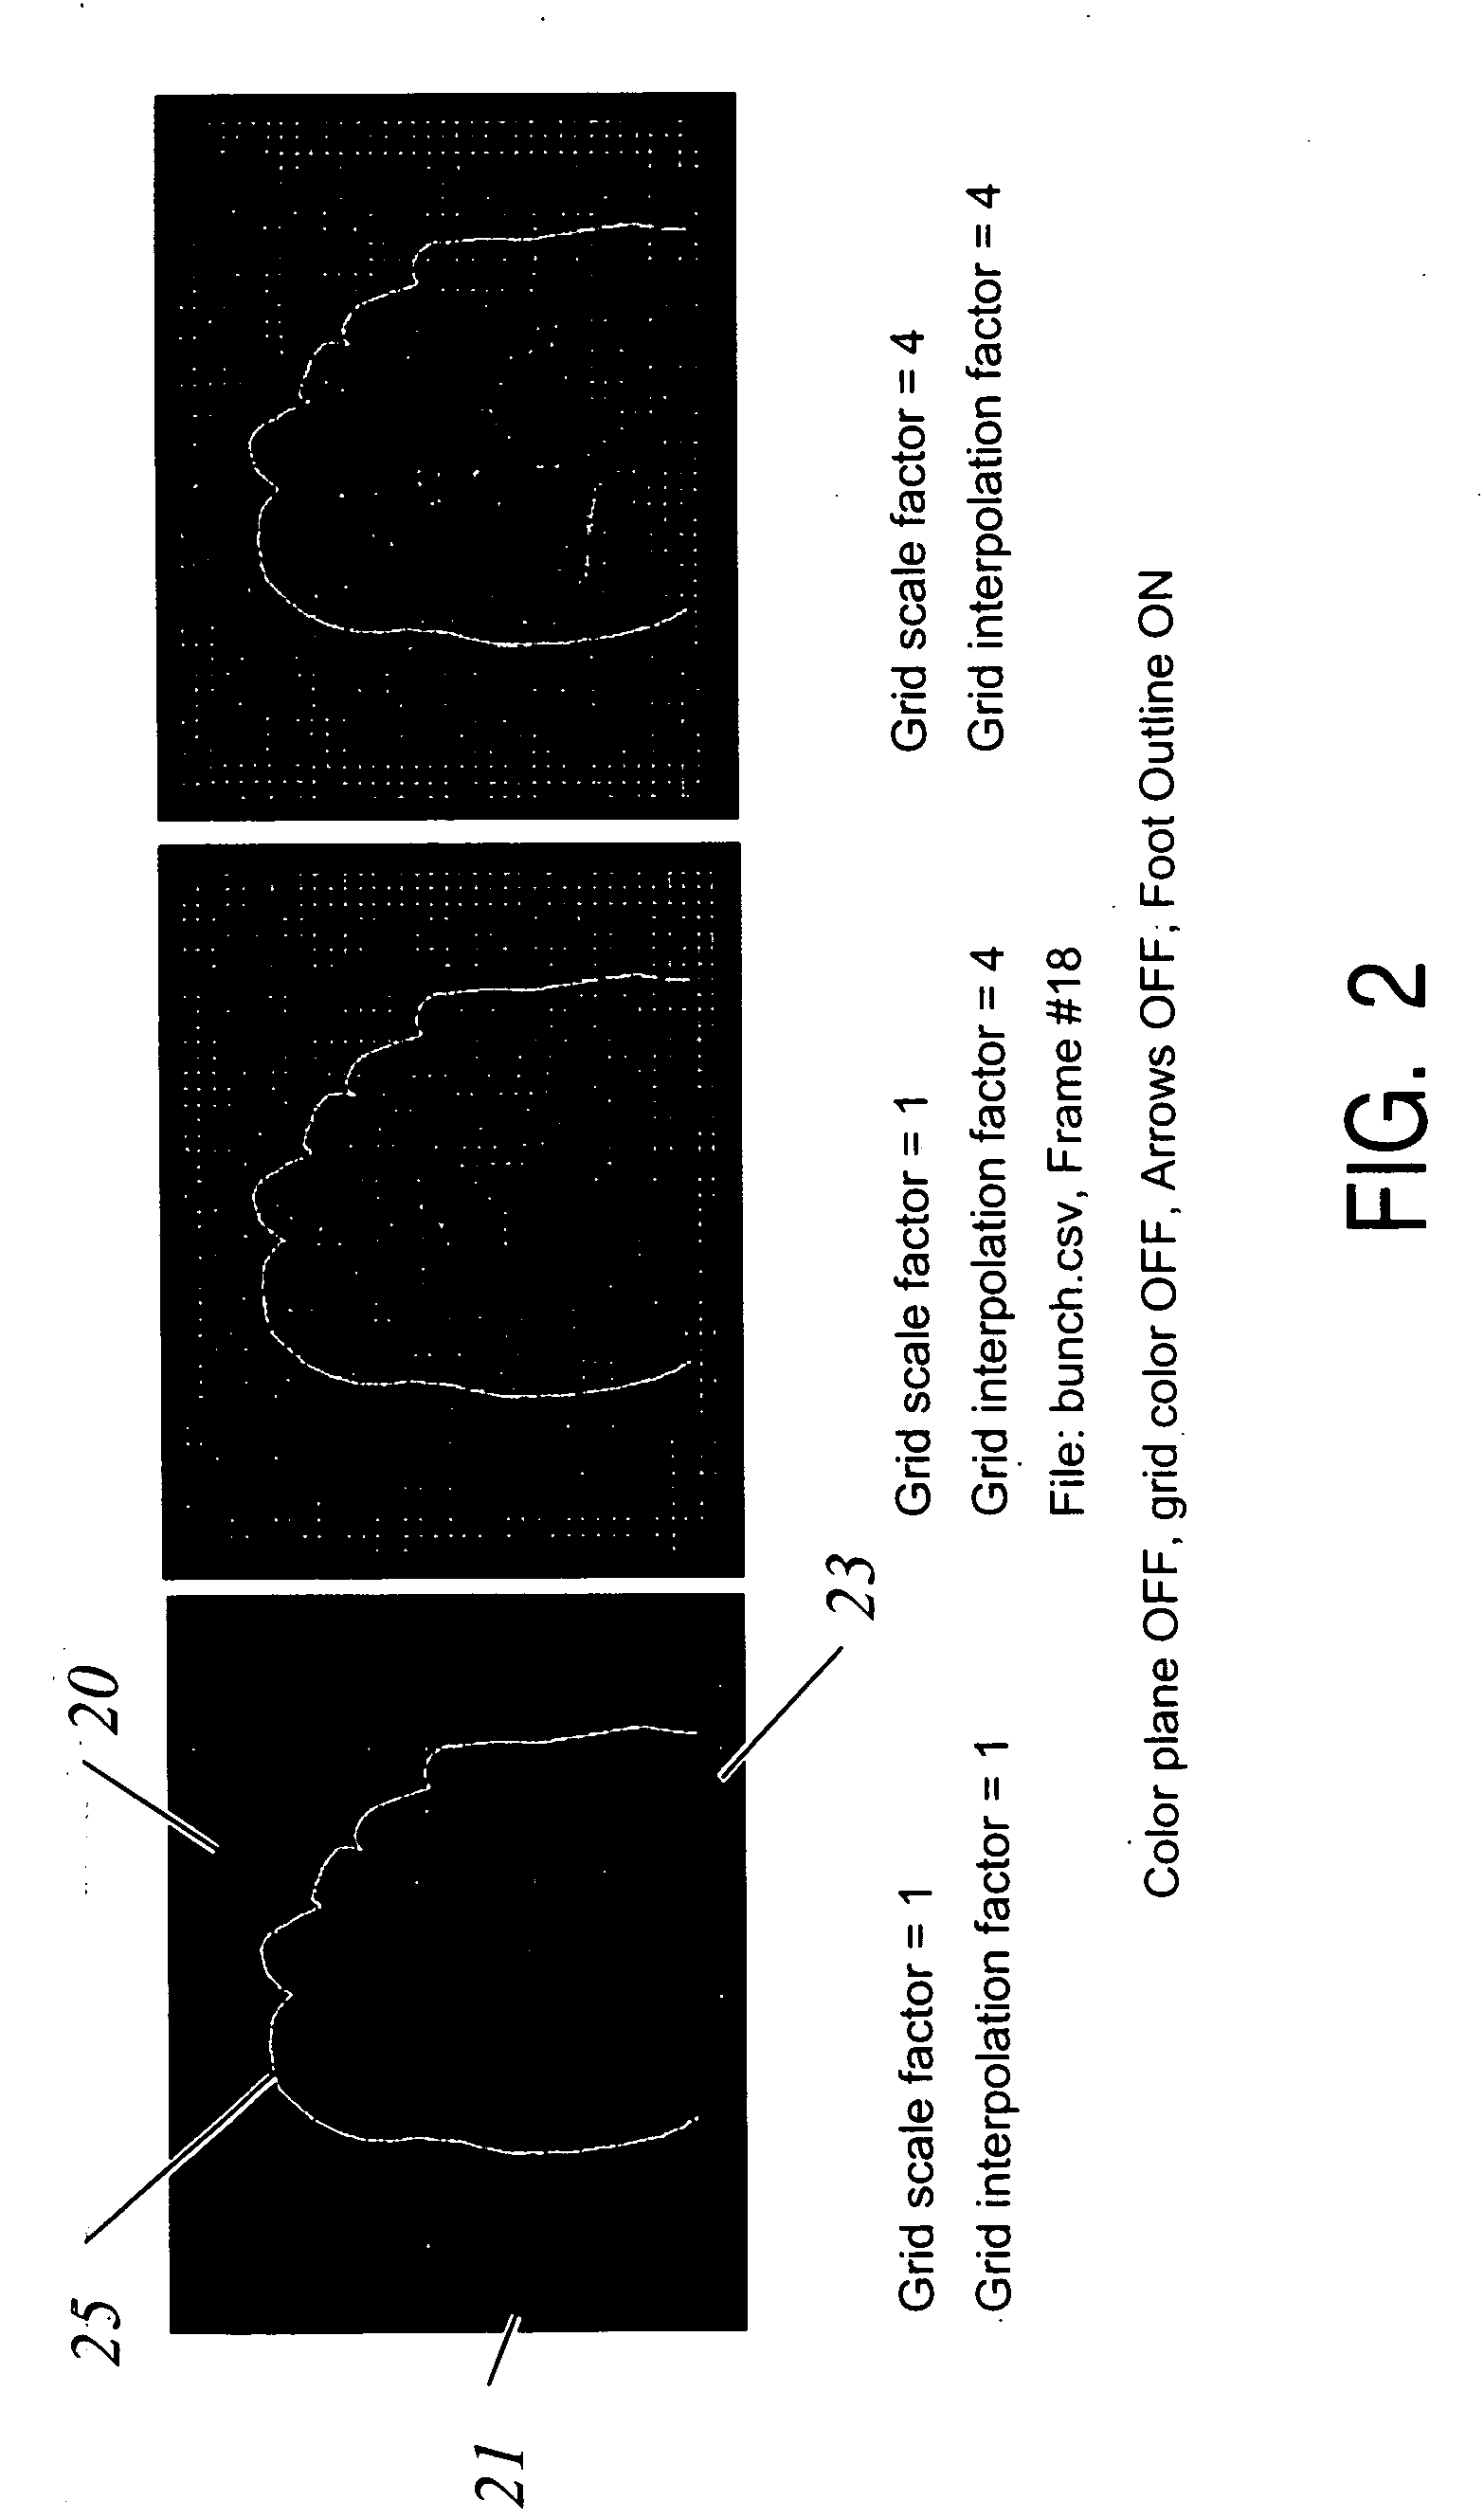 Foot pressure and shear data visualization system